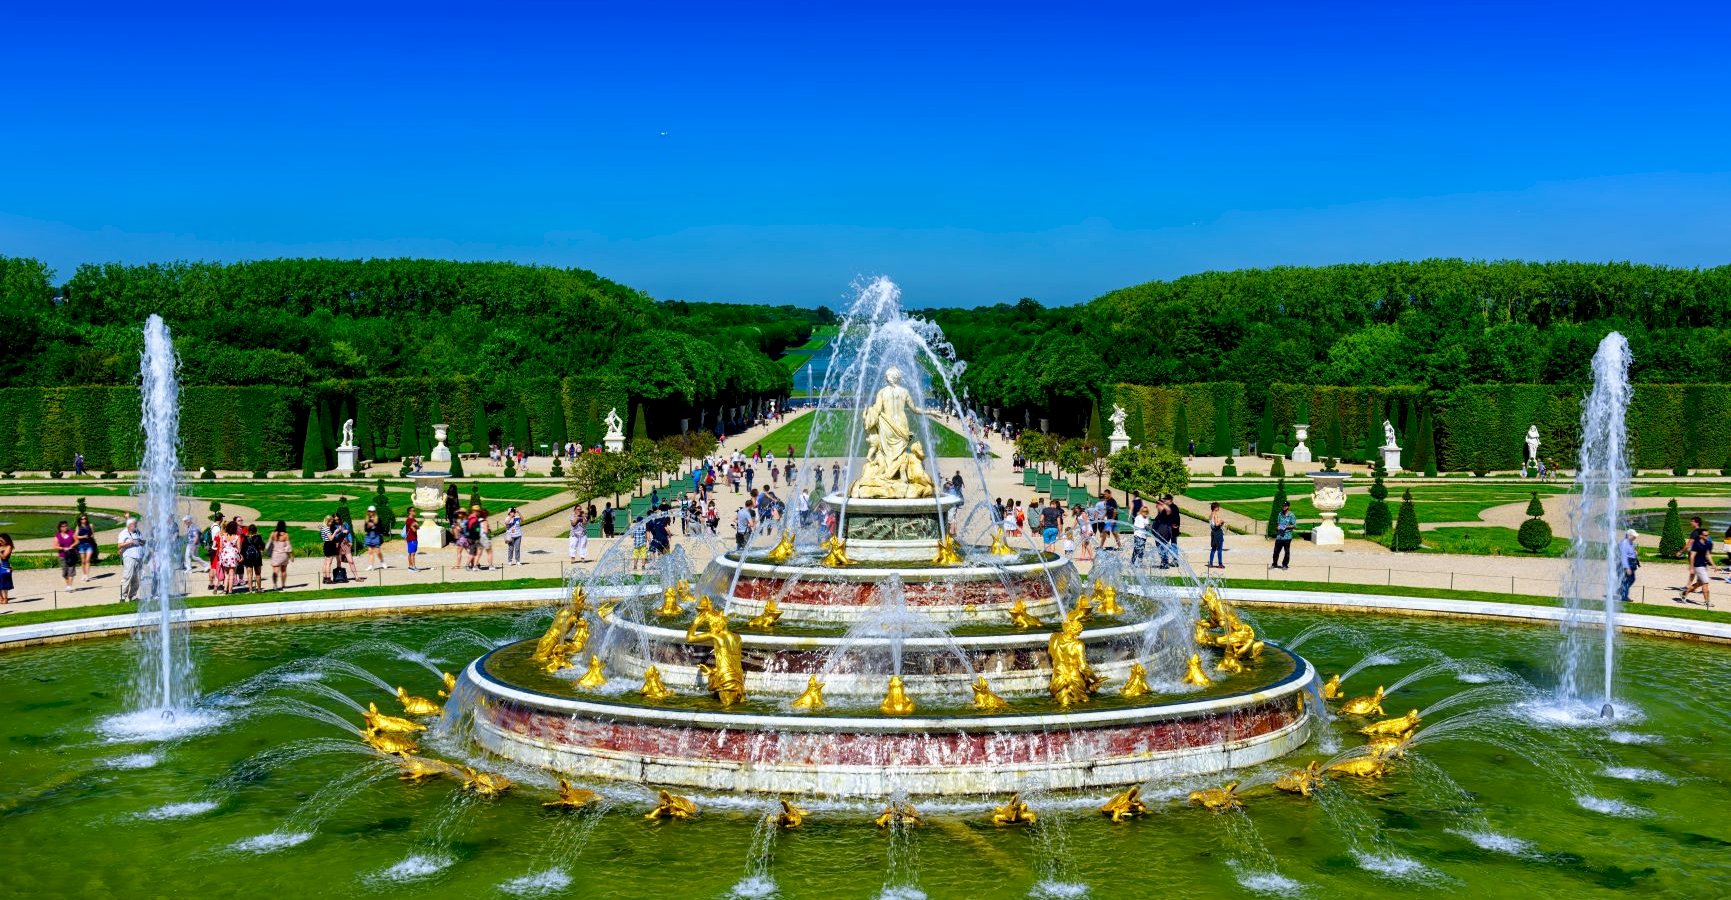 Ophorus Tours - A Private Day Trip From Paris to Versailles Palace & Gardens 